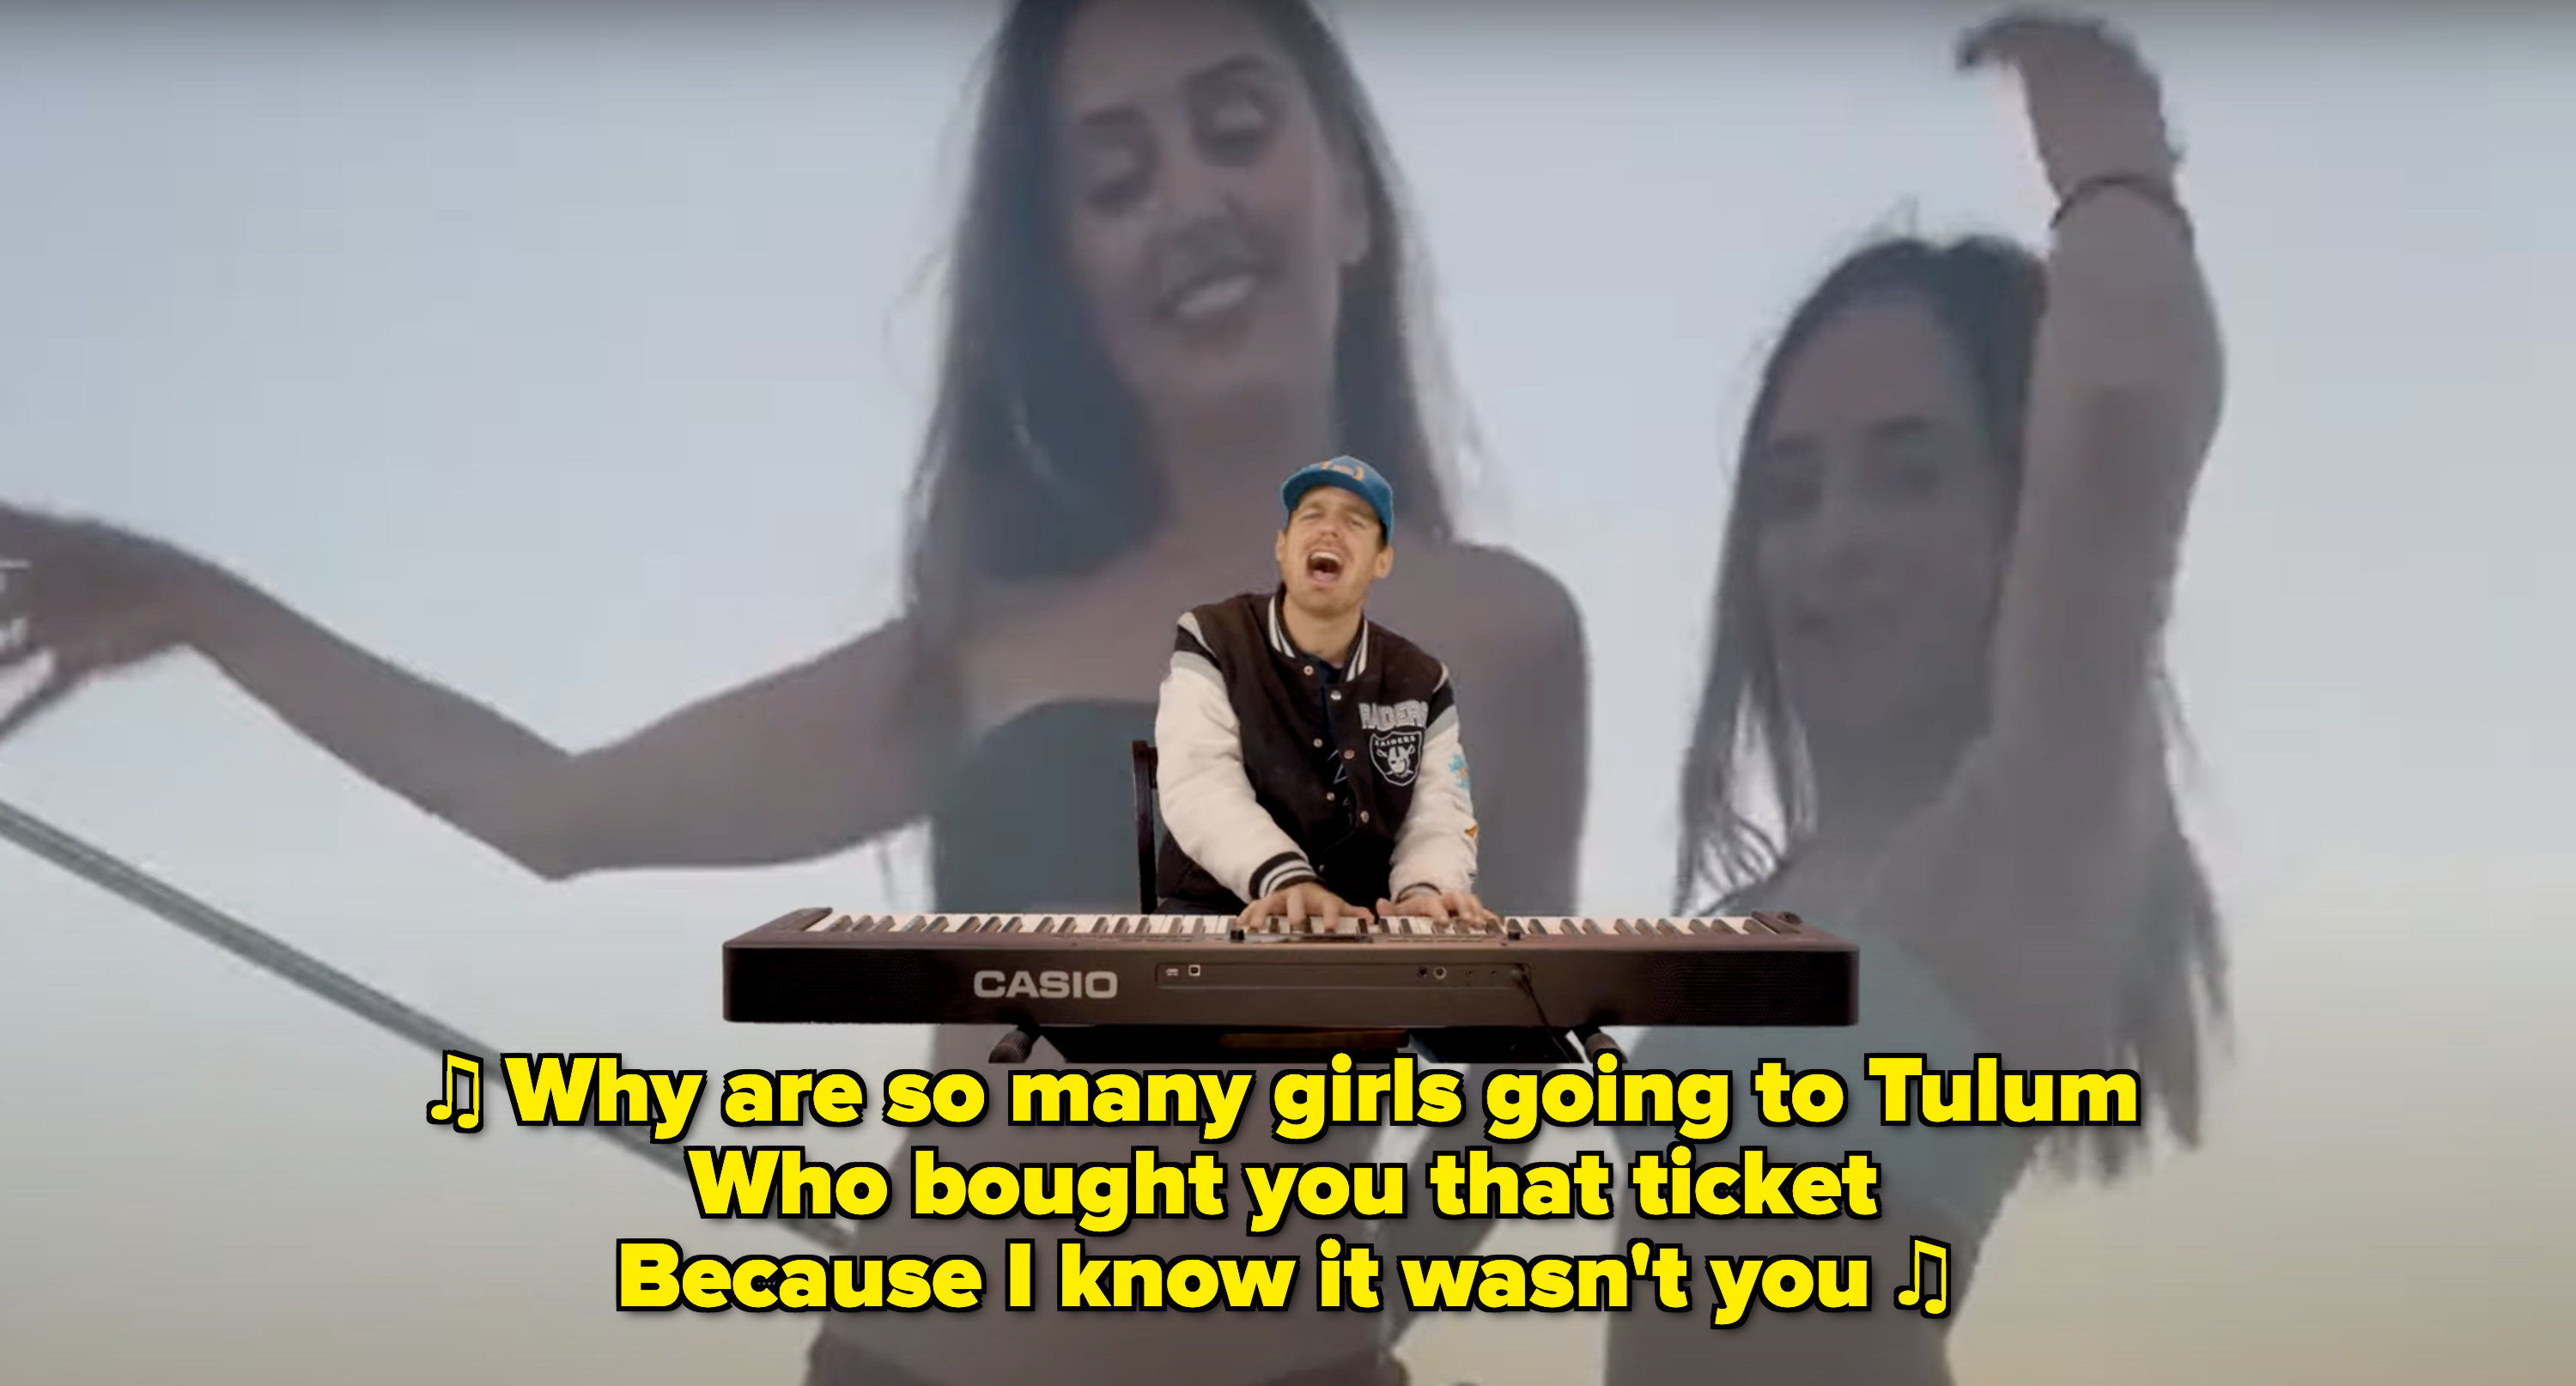 Emoney sings in his music video &quot;Tulum&quot; about girls who go to Tulum